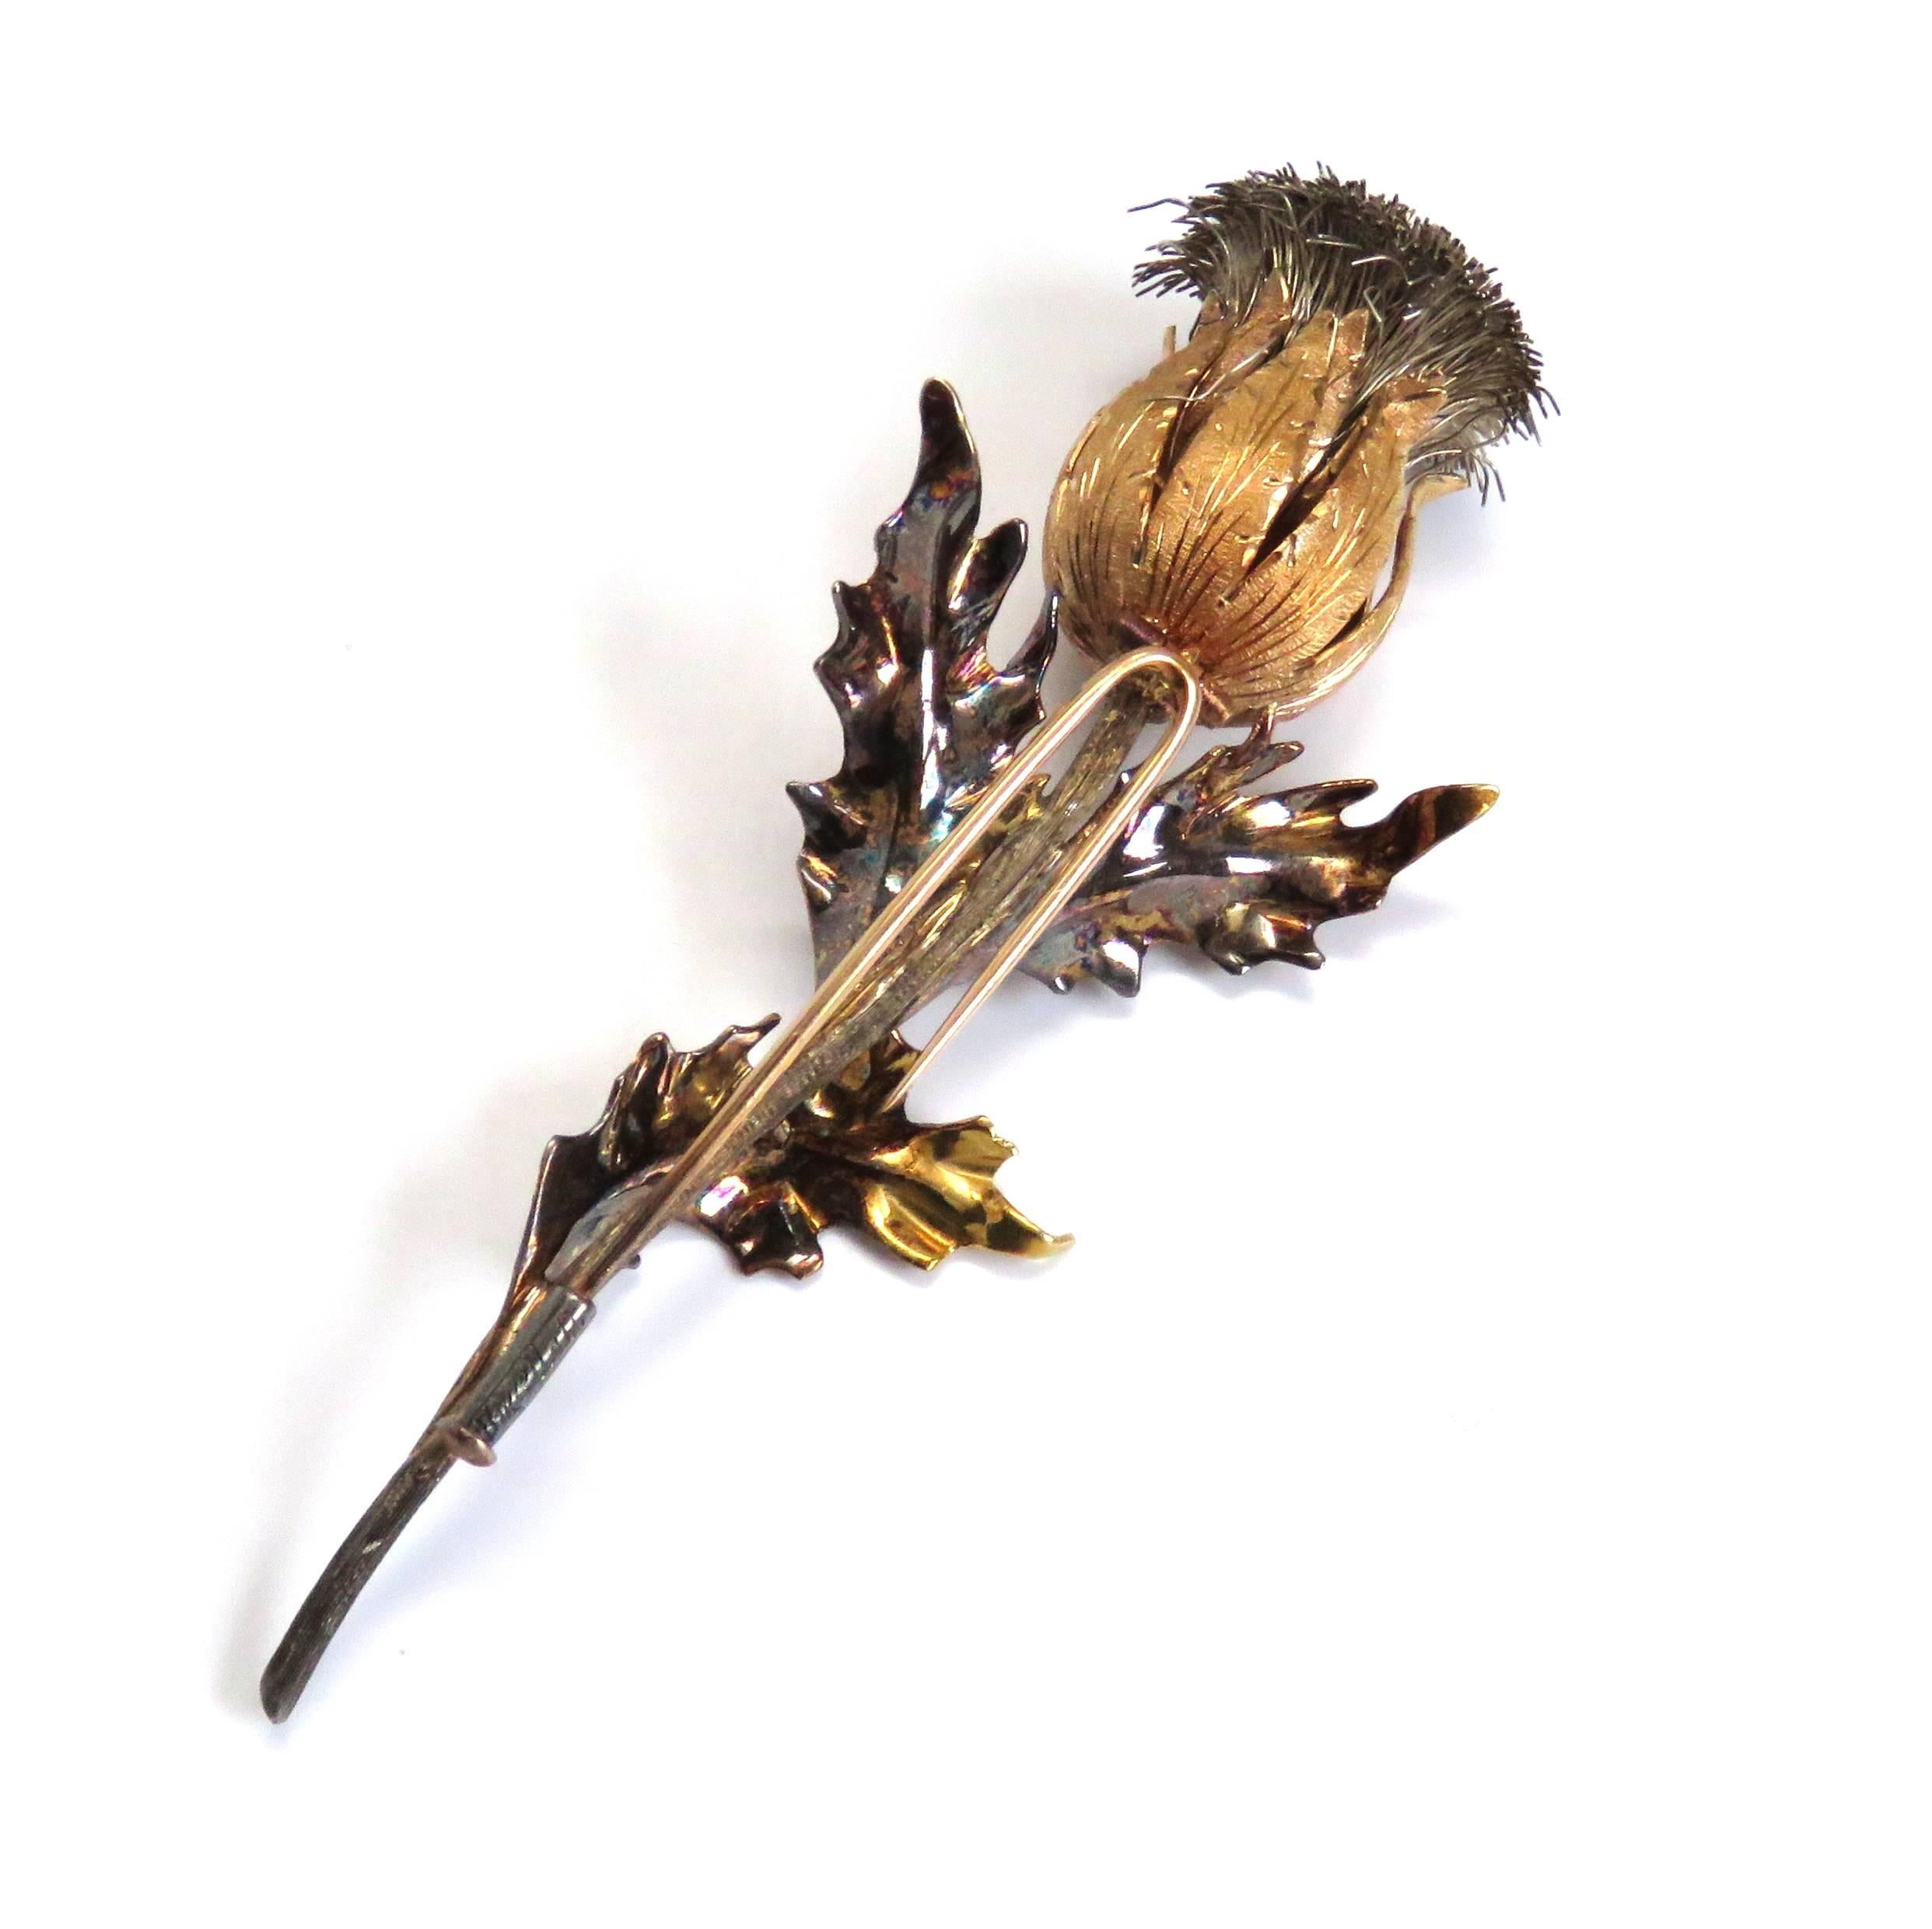 An 18k white yellow and rose gold brooch by Buccellati.  The brooch measures 86mm x 33mm and weighs 21.8 grams.  Marked: Buccellati, 18k, 16100.